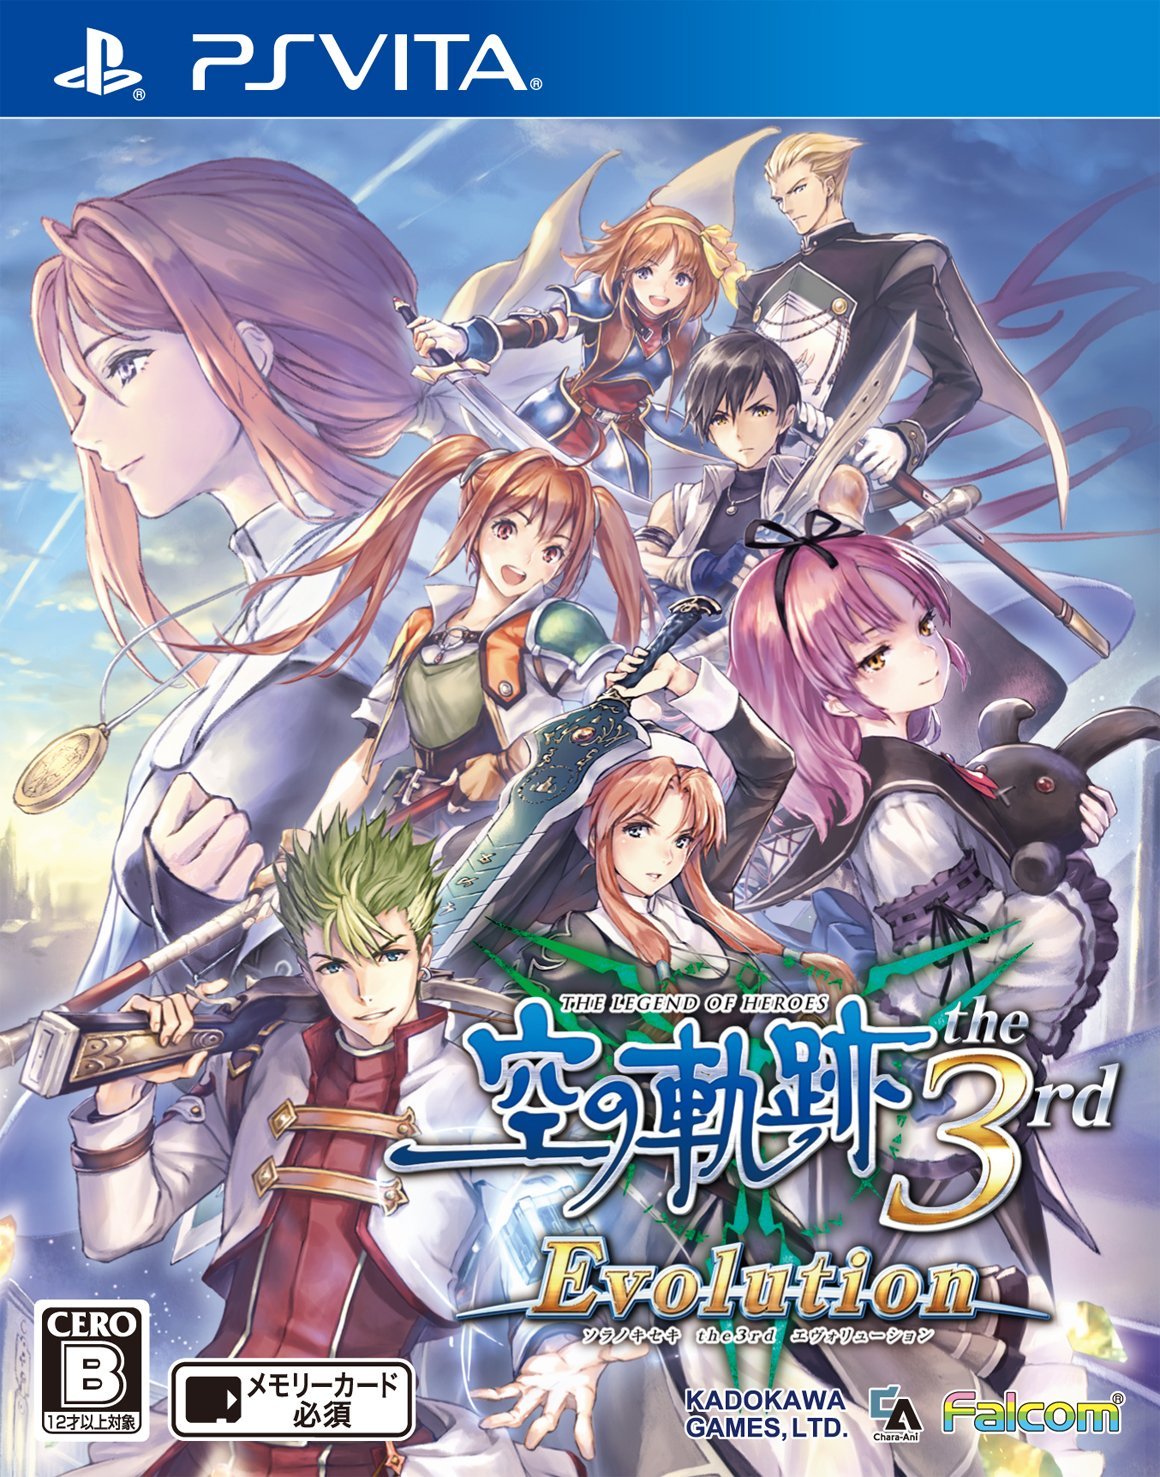 trails-series-where-to-start-legend-of-heroes-time-line-can-i-start